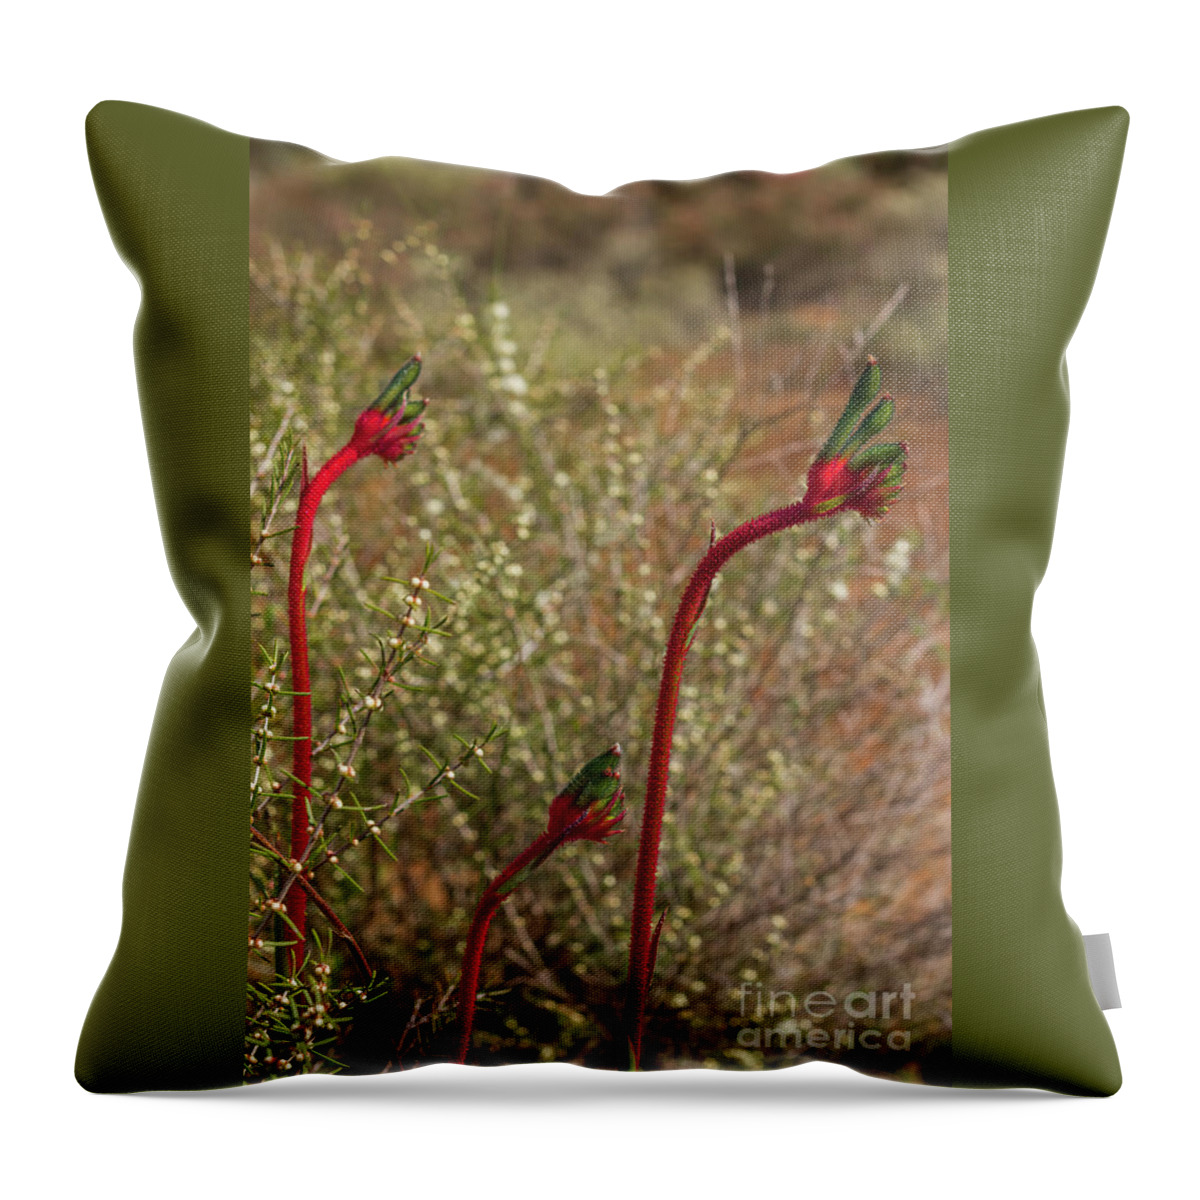 Kangaroo Paw Throw Pillow featuring the photograph Mum, Dad and Baby Paws by Elaine Teague